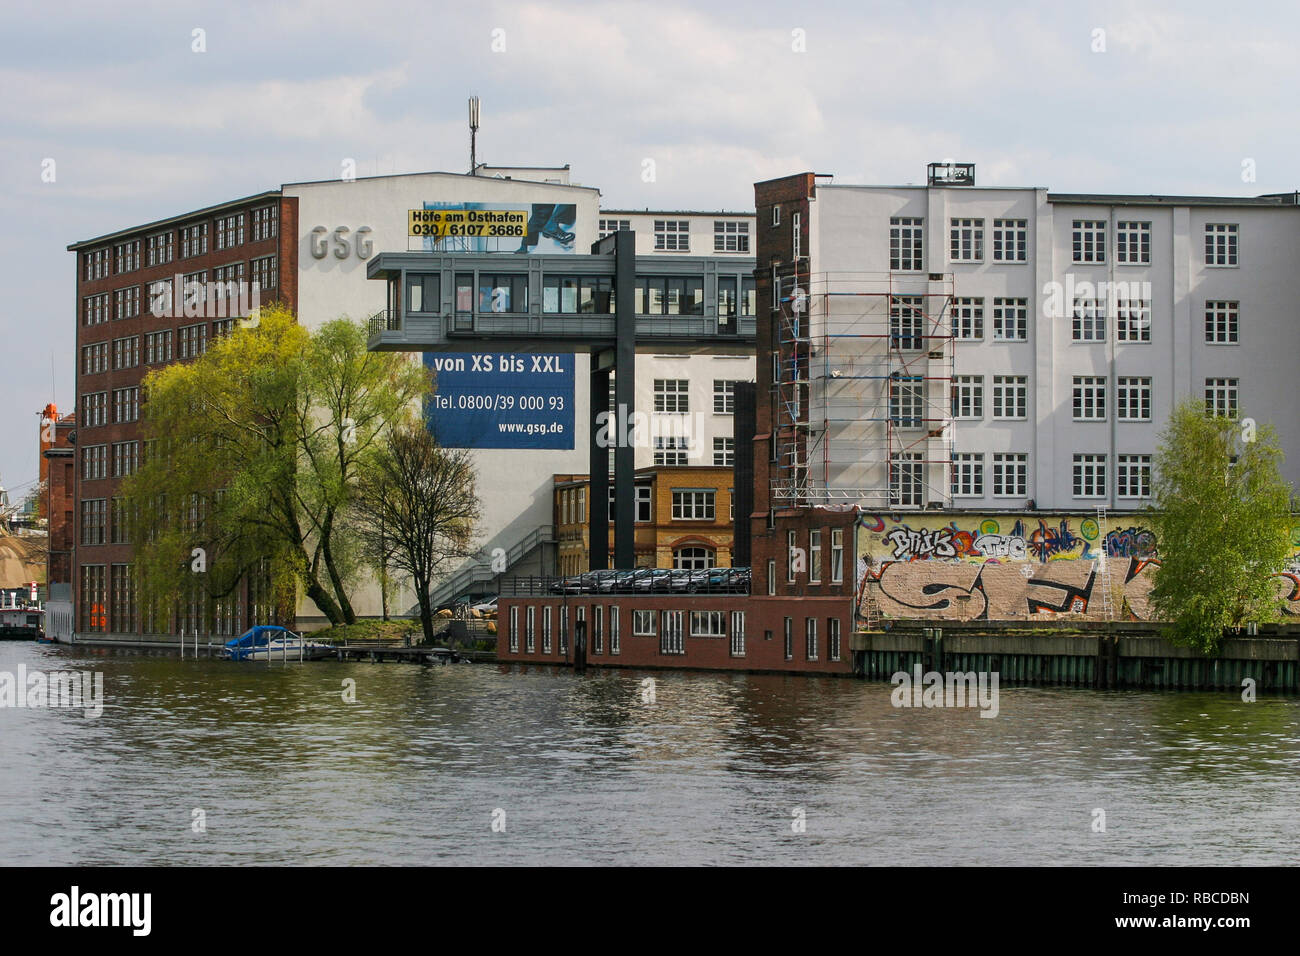 Spree riverbanks seen from a crusie boat, Berlin, Germany Stock Photo